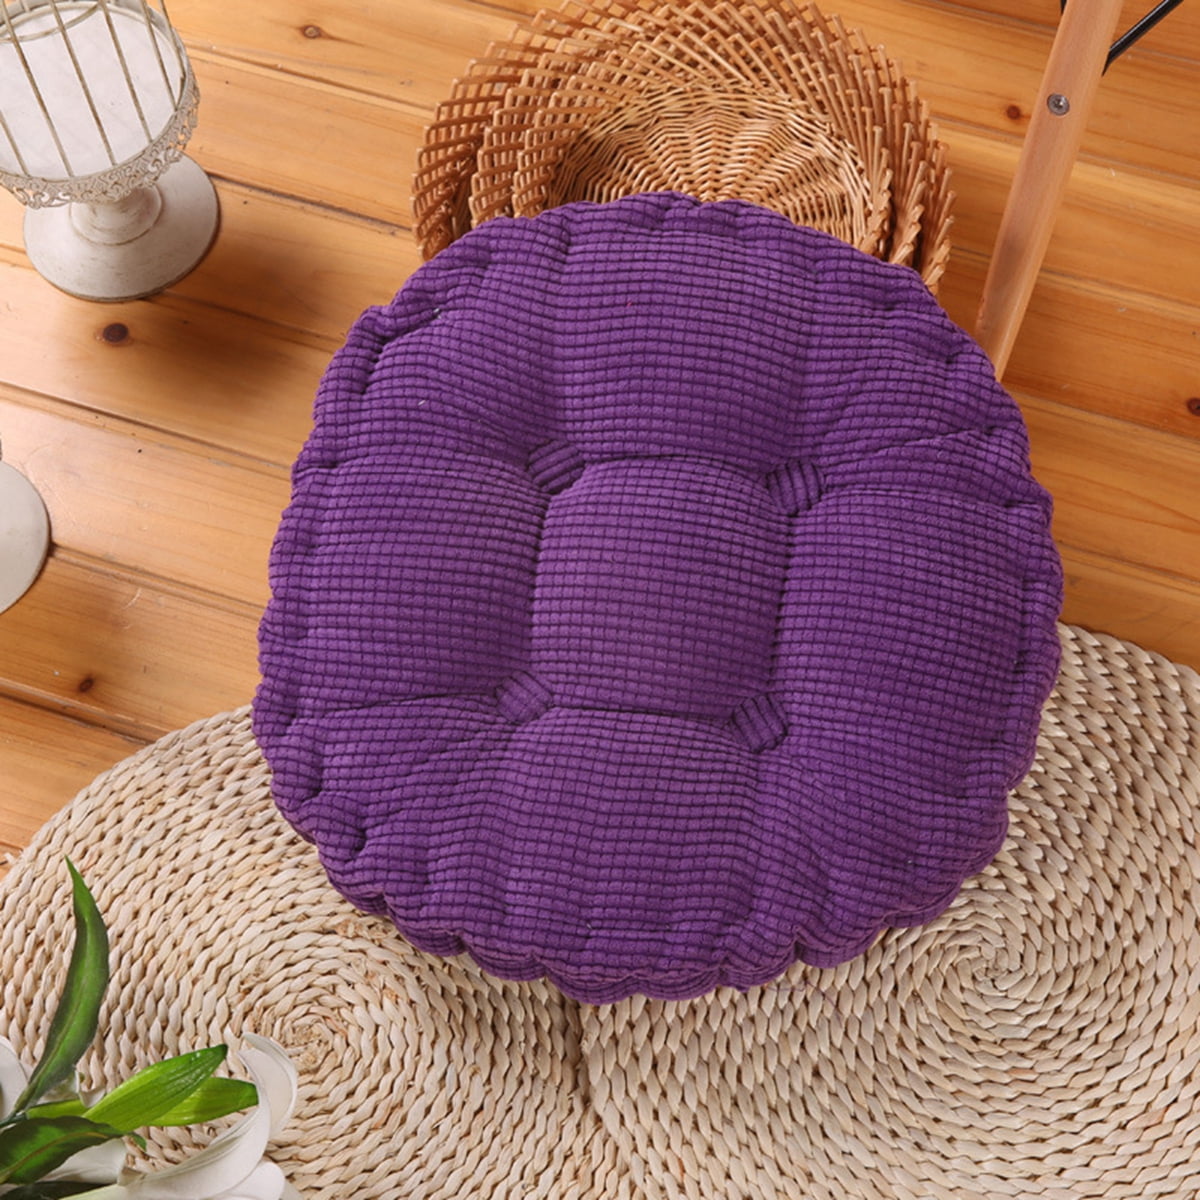  EXCEART Office Chair Mats Office Chair Cushion Outside Chair  Cusionshions Outdoor Chairs Multi-Purpose Chair Cushion Outdoor Chair Seats  Cushions Round Seat Cushion Decorative Mat Felt Pad : Arts, Crafts & Sewing